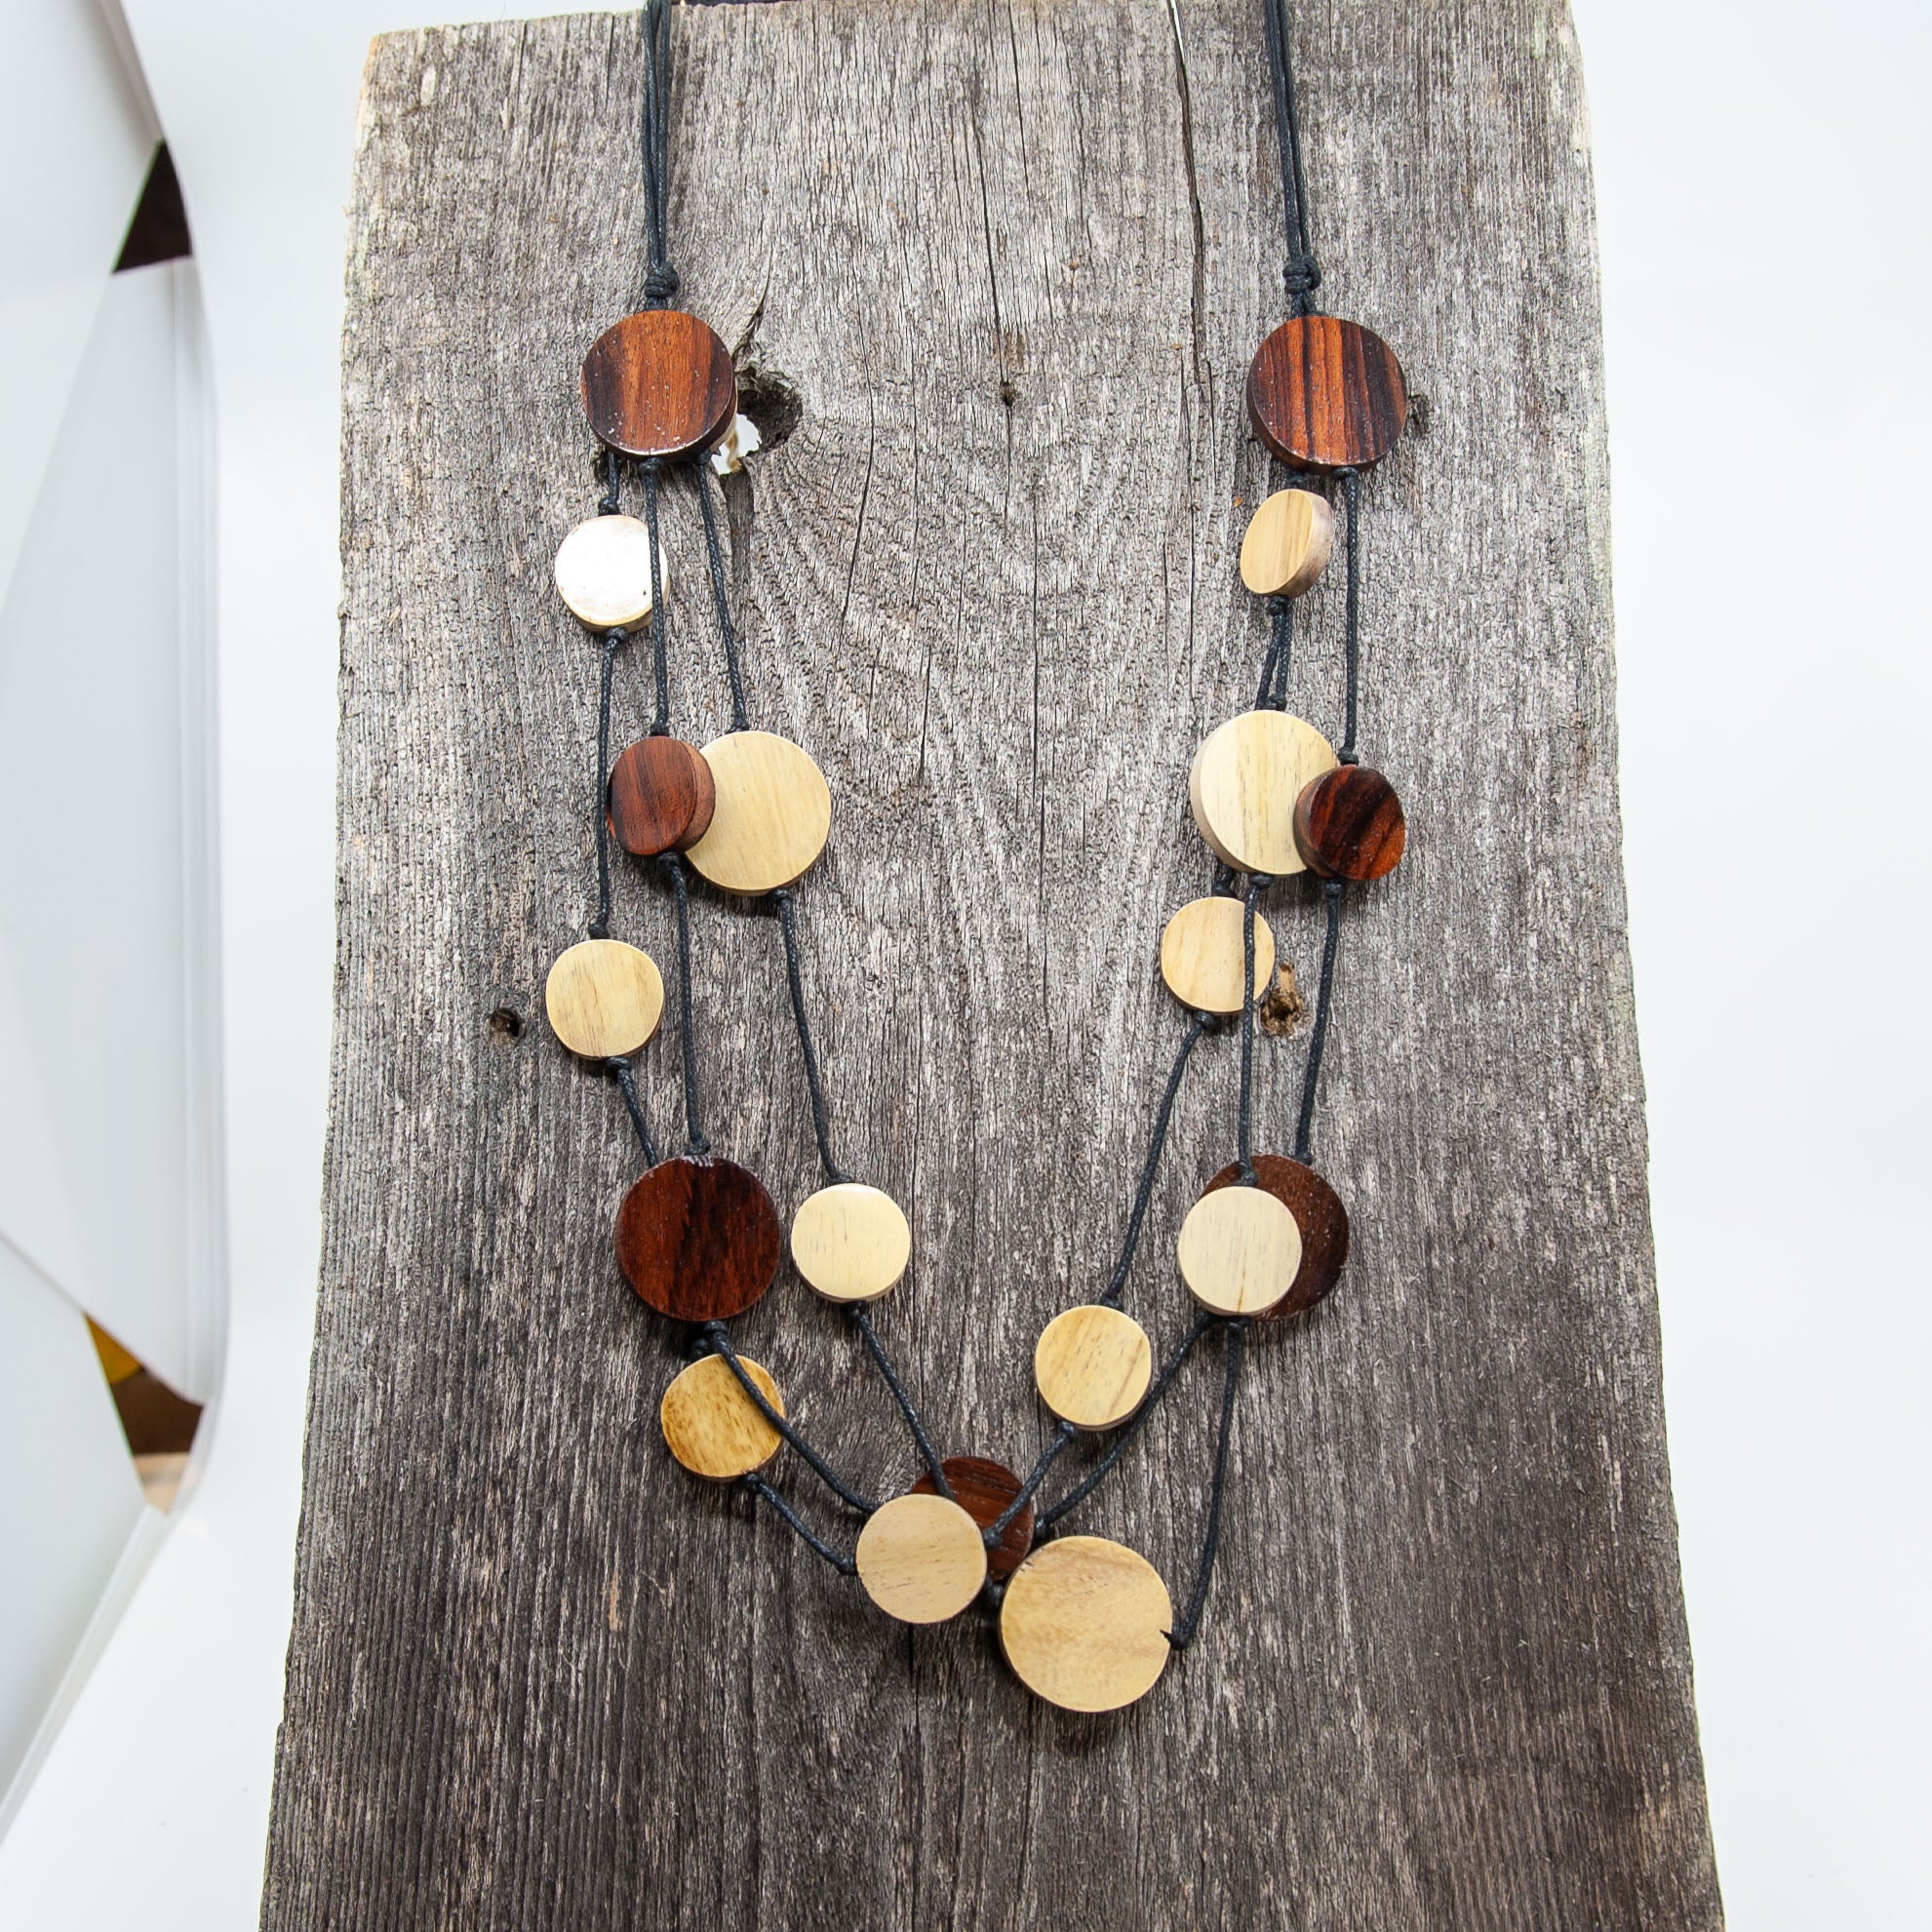 Top Of The WOOD Chain - Black & Brown Wood Necklace - Chic Jewelry Bou